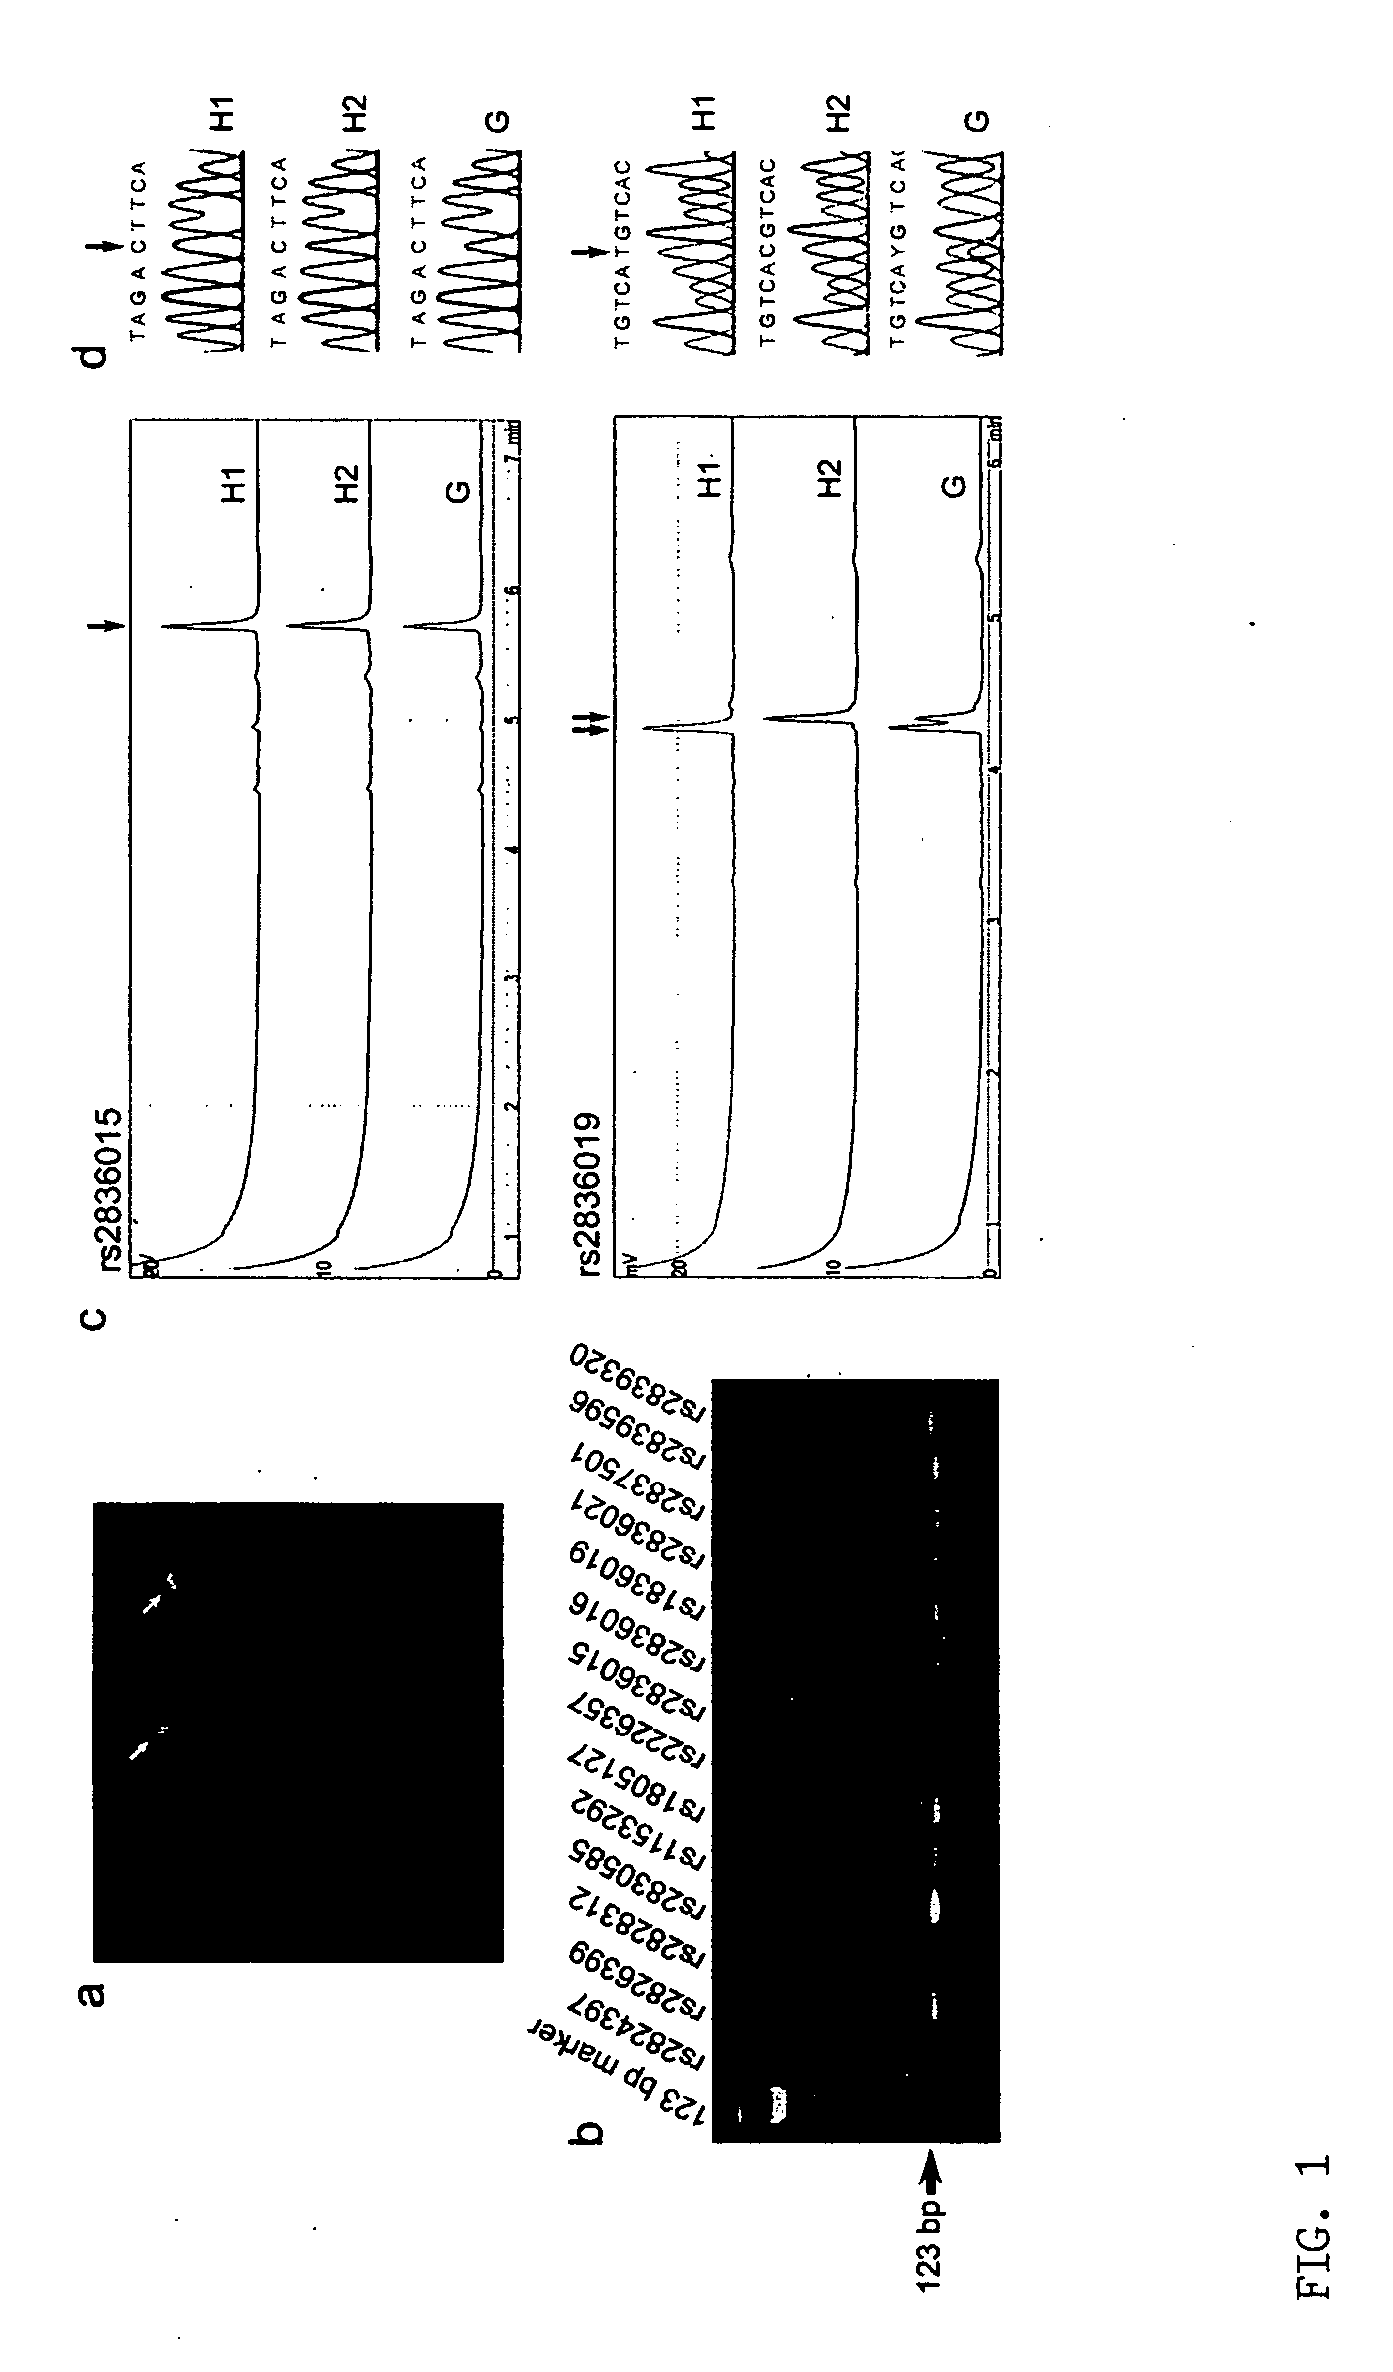 Microdissection-based methods for determining genomic features of single chromosomes